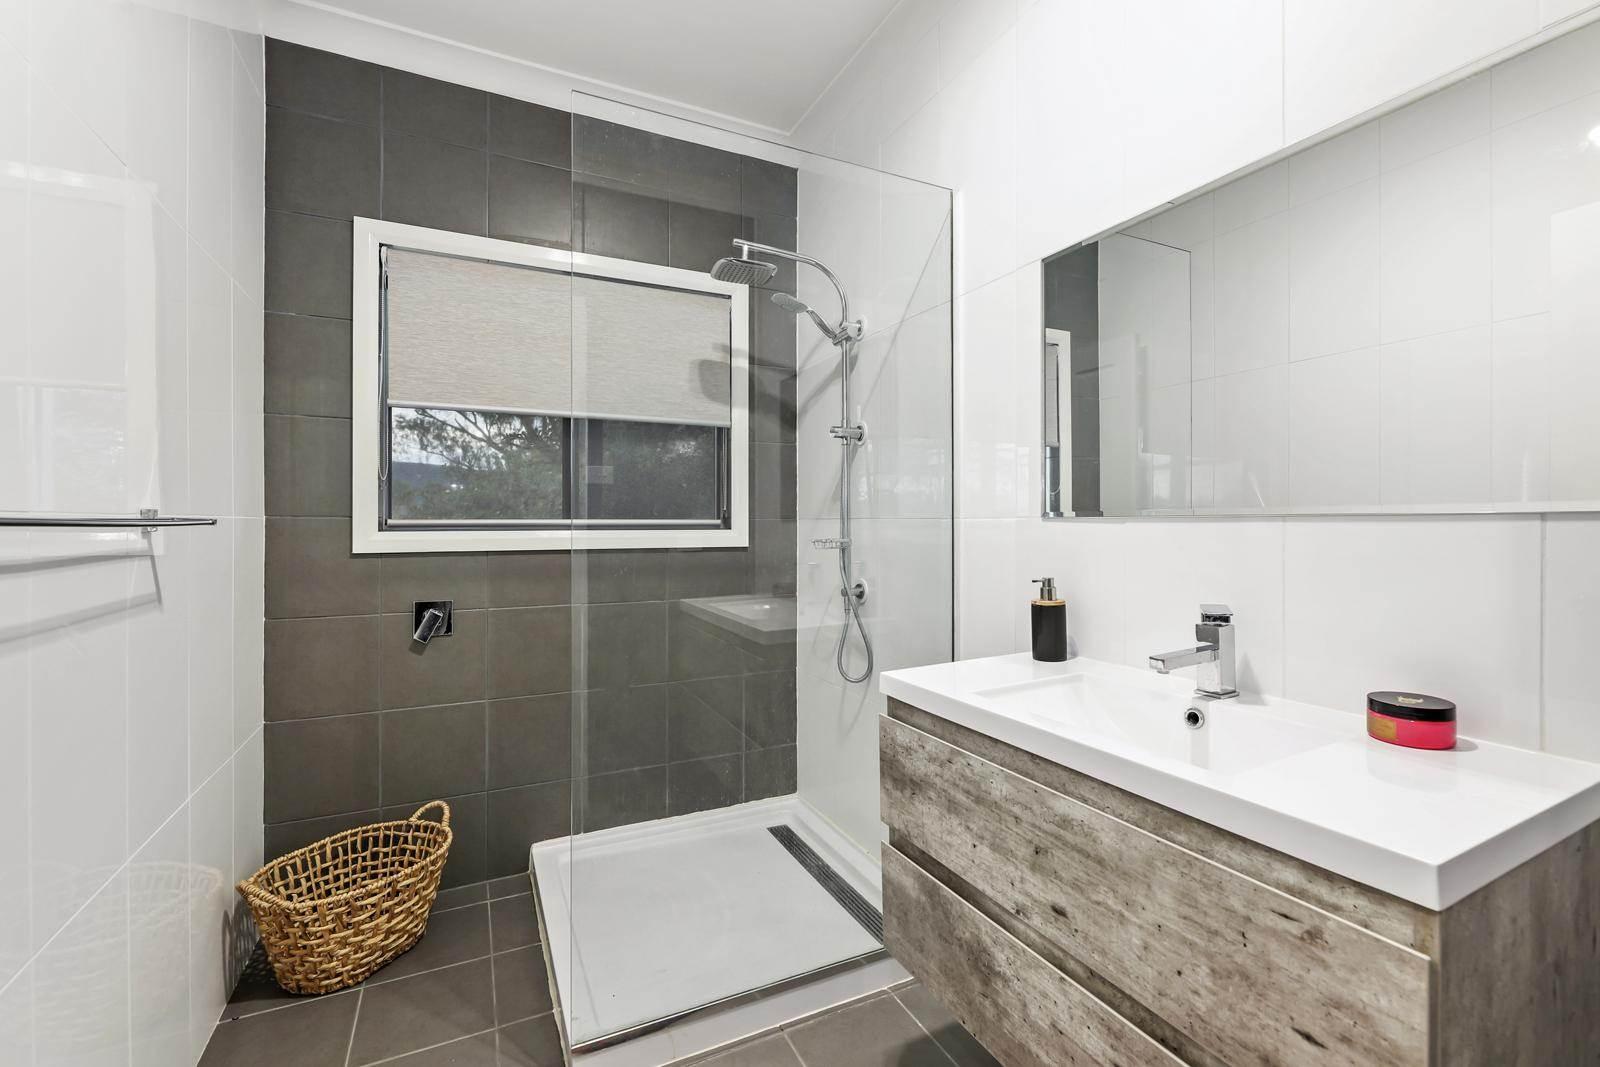 Two new bathrooms come complete with a beautiful bath in the ensuite.